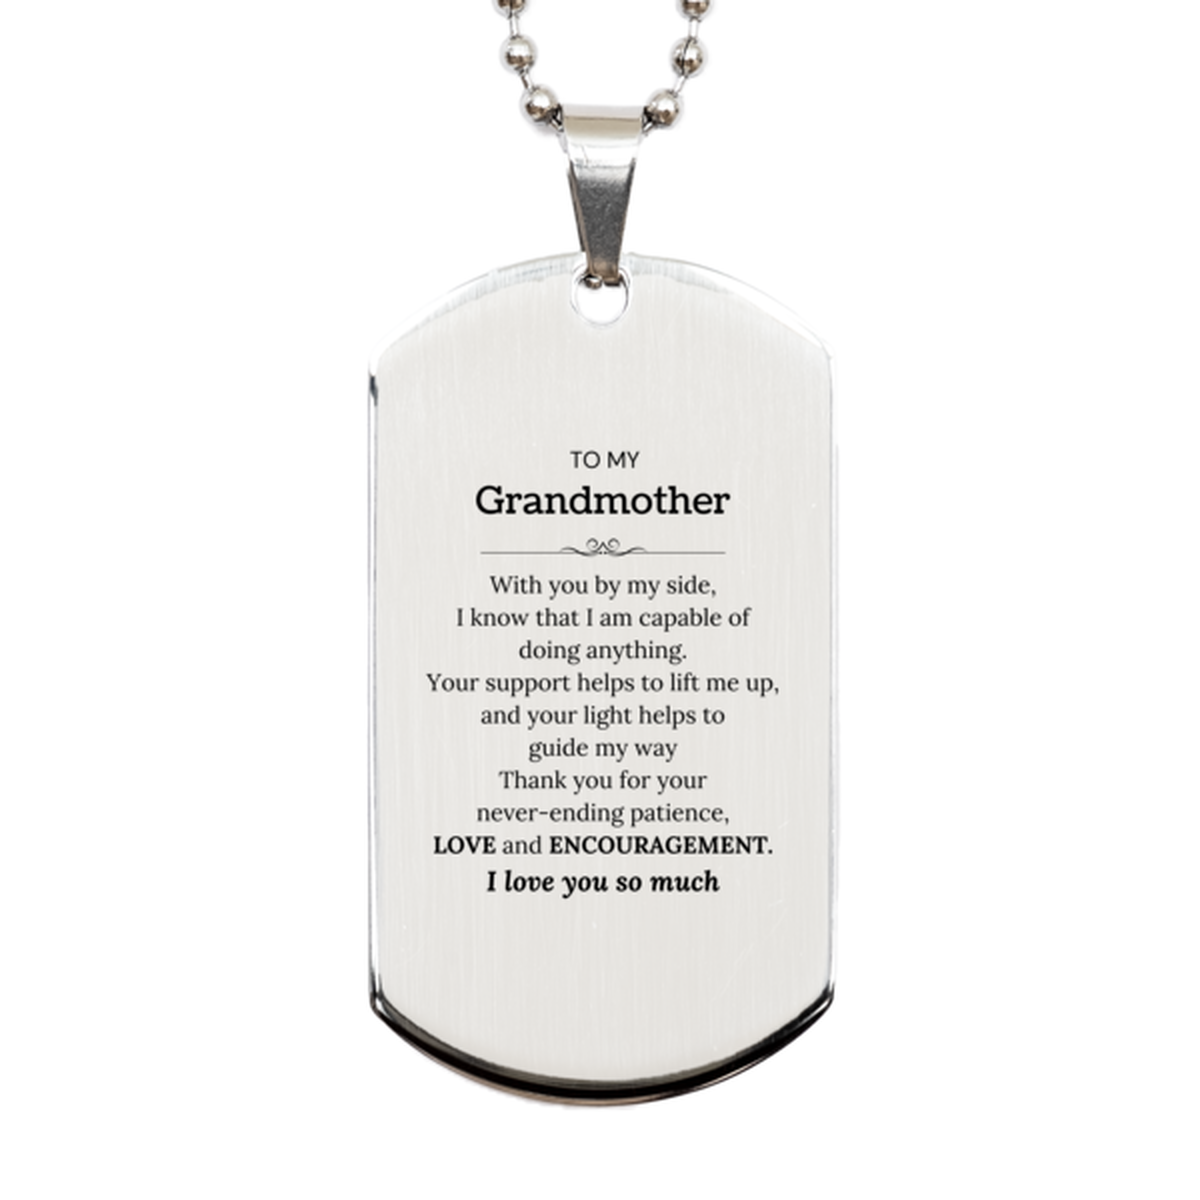 Appreciation Grandmother Silver Dog Tag Gifts, To My Grandmother Birthday Christmas Wedding Keepsake Gifts for Grandmother With you by my side, I know that I am capable of doing anything. I love you so much